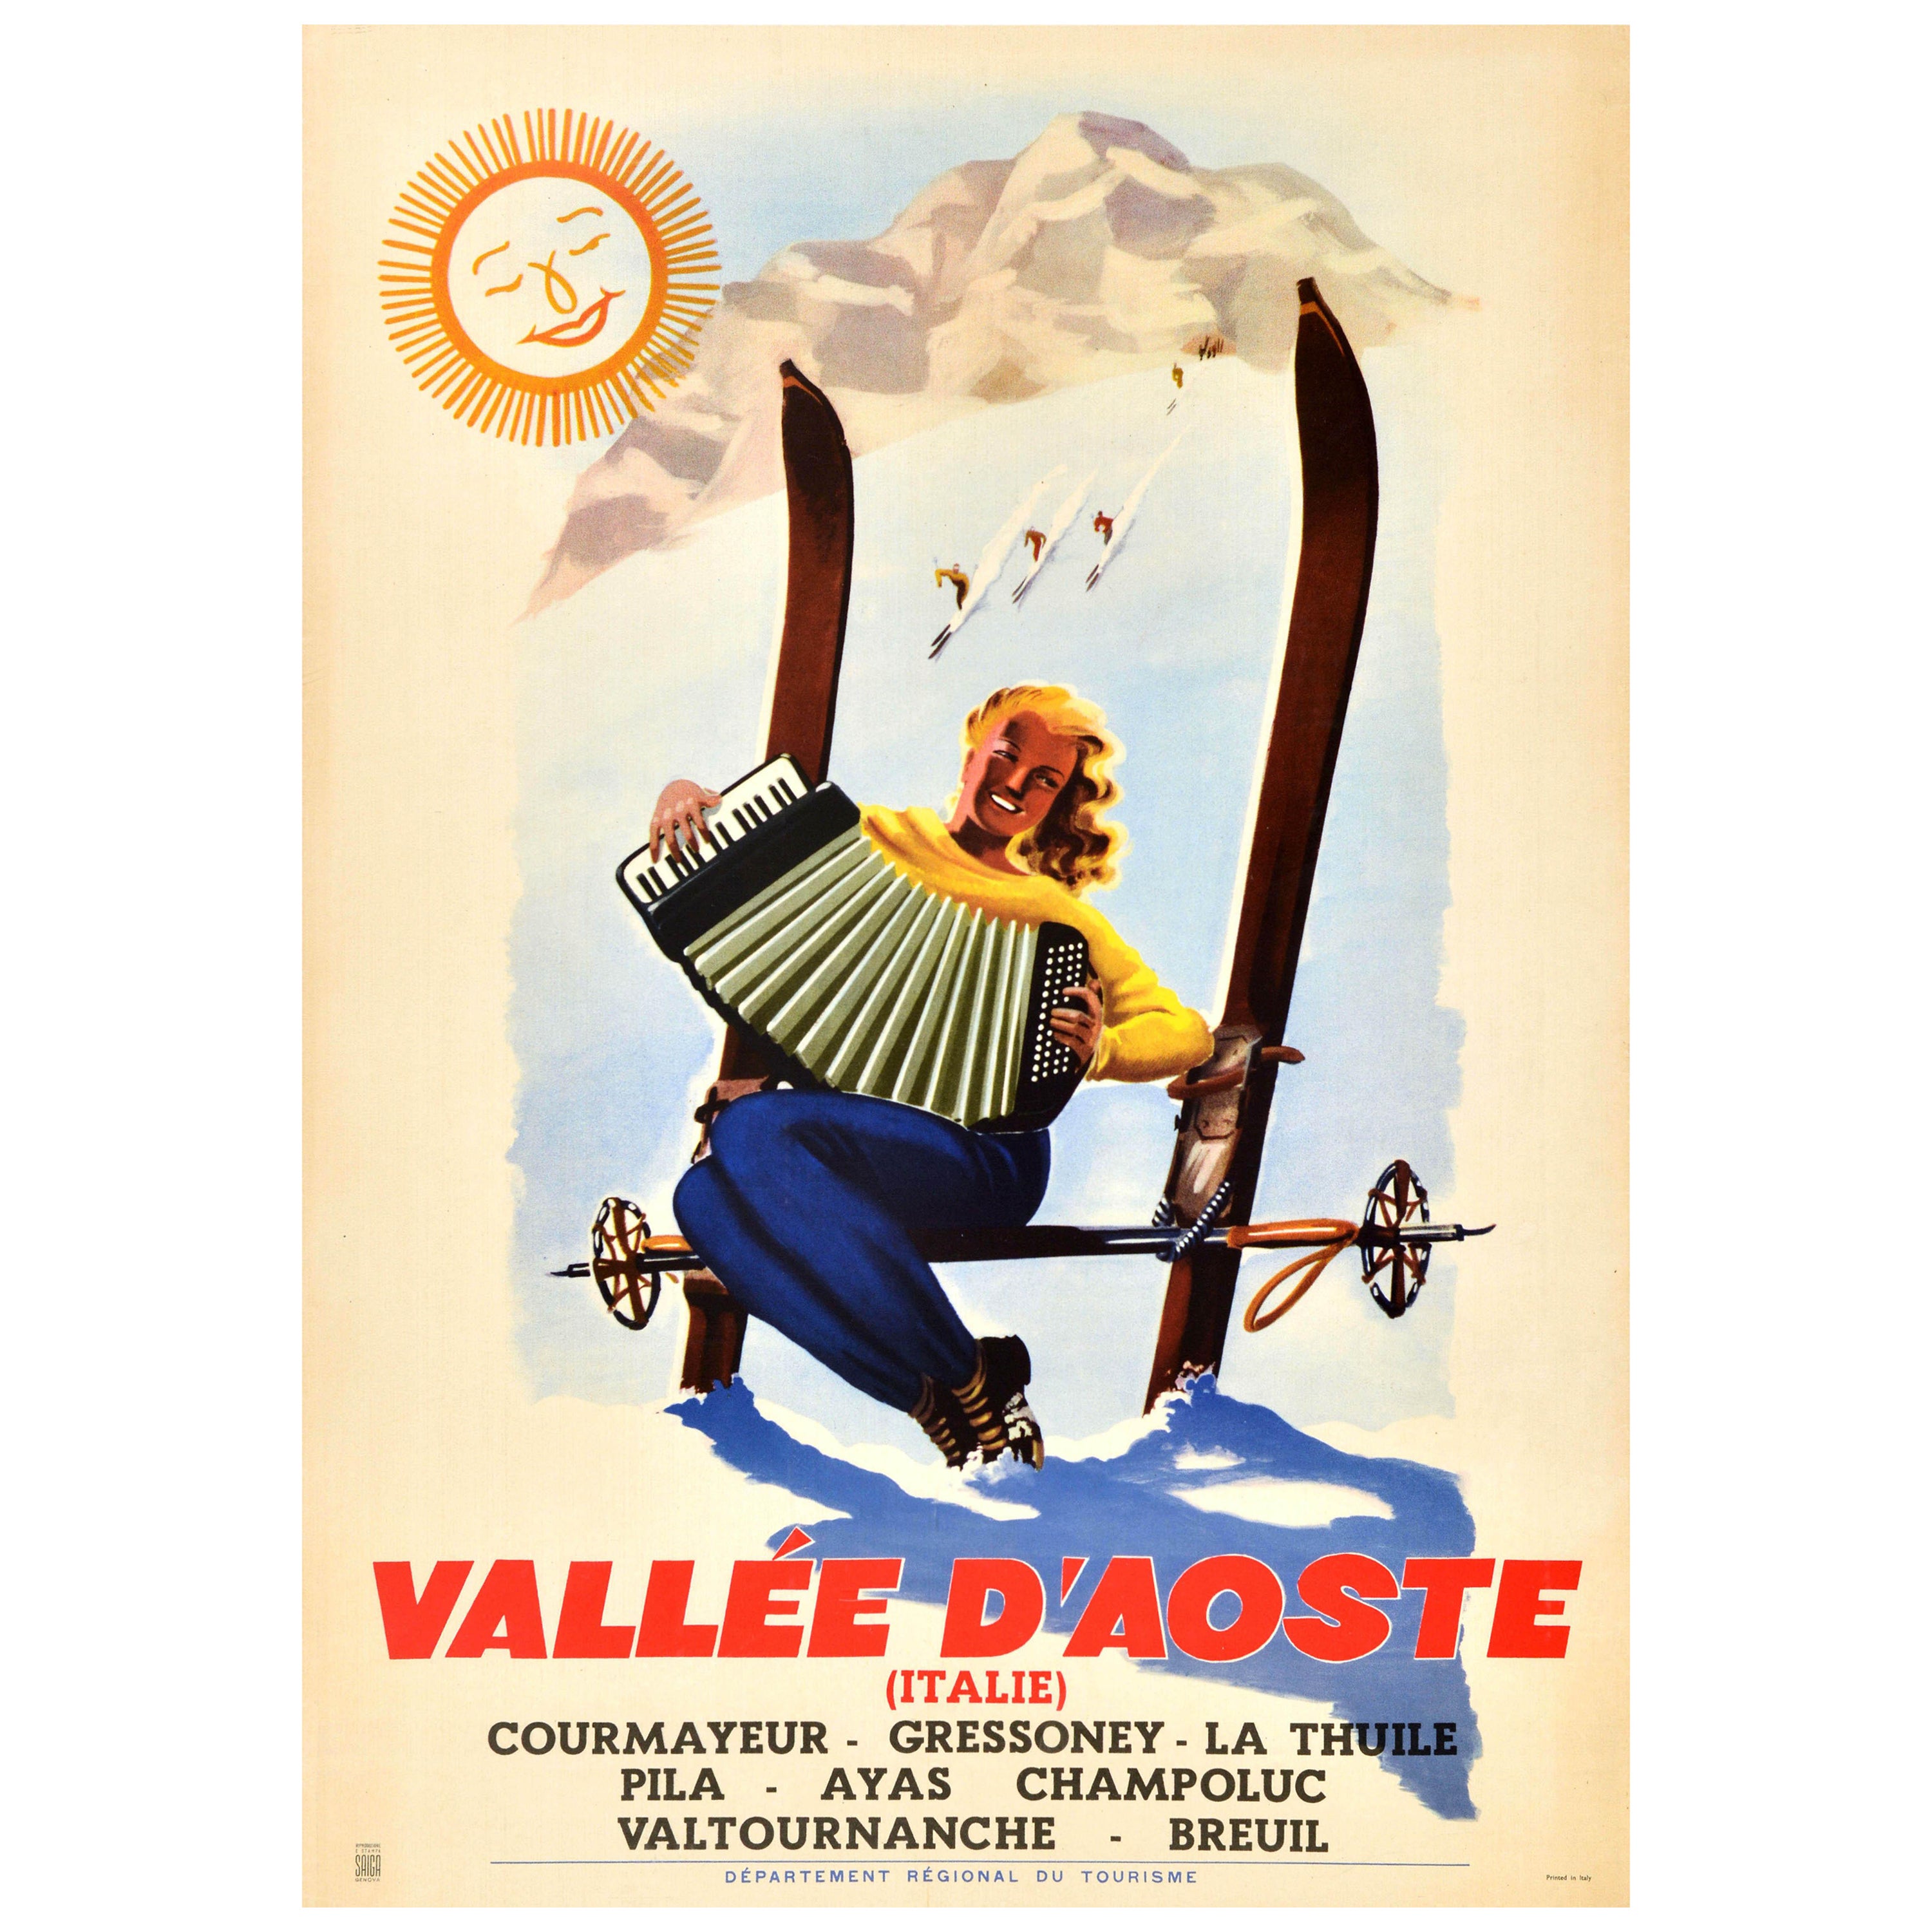 Original Vintage Winter Sport Travel Poster Vallee D'Aoste Italy Aosta Skiing For Sale